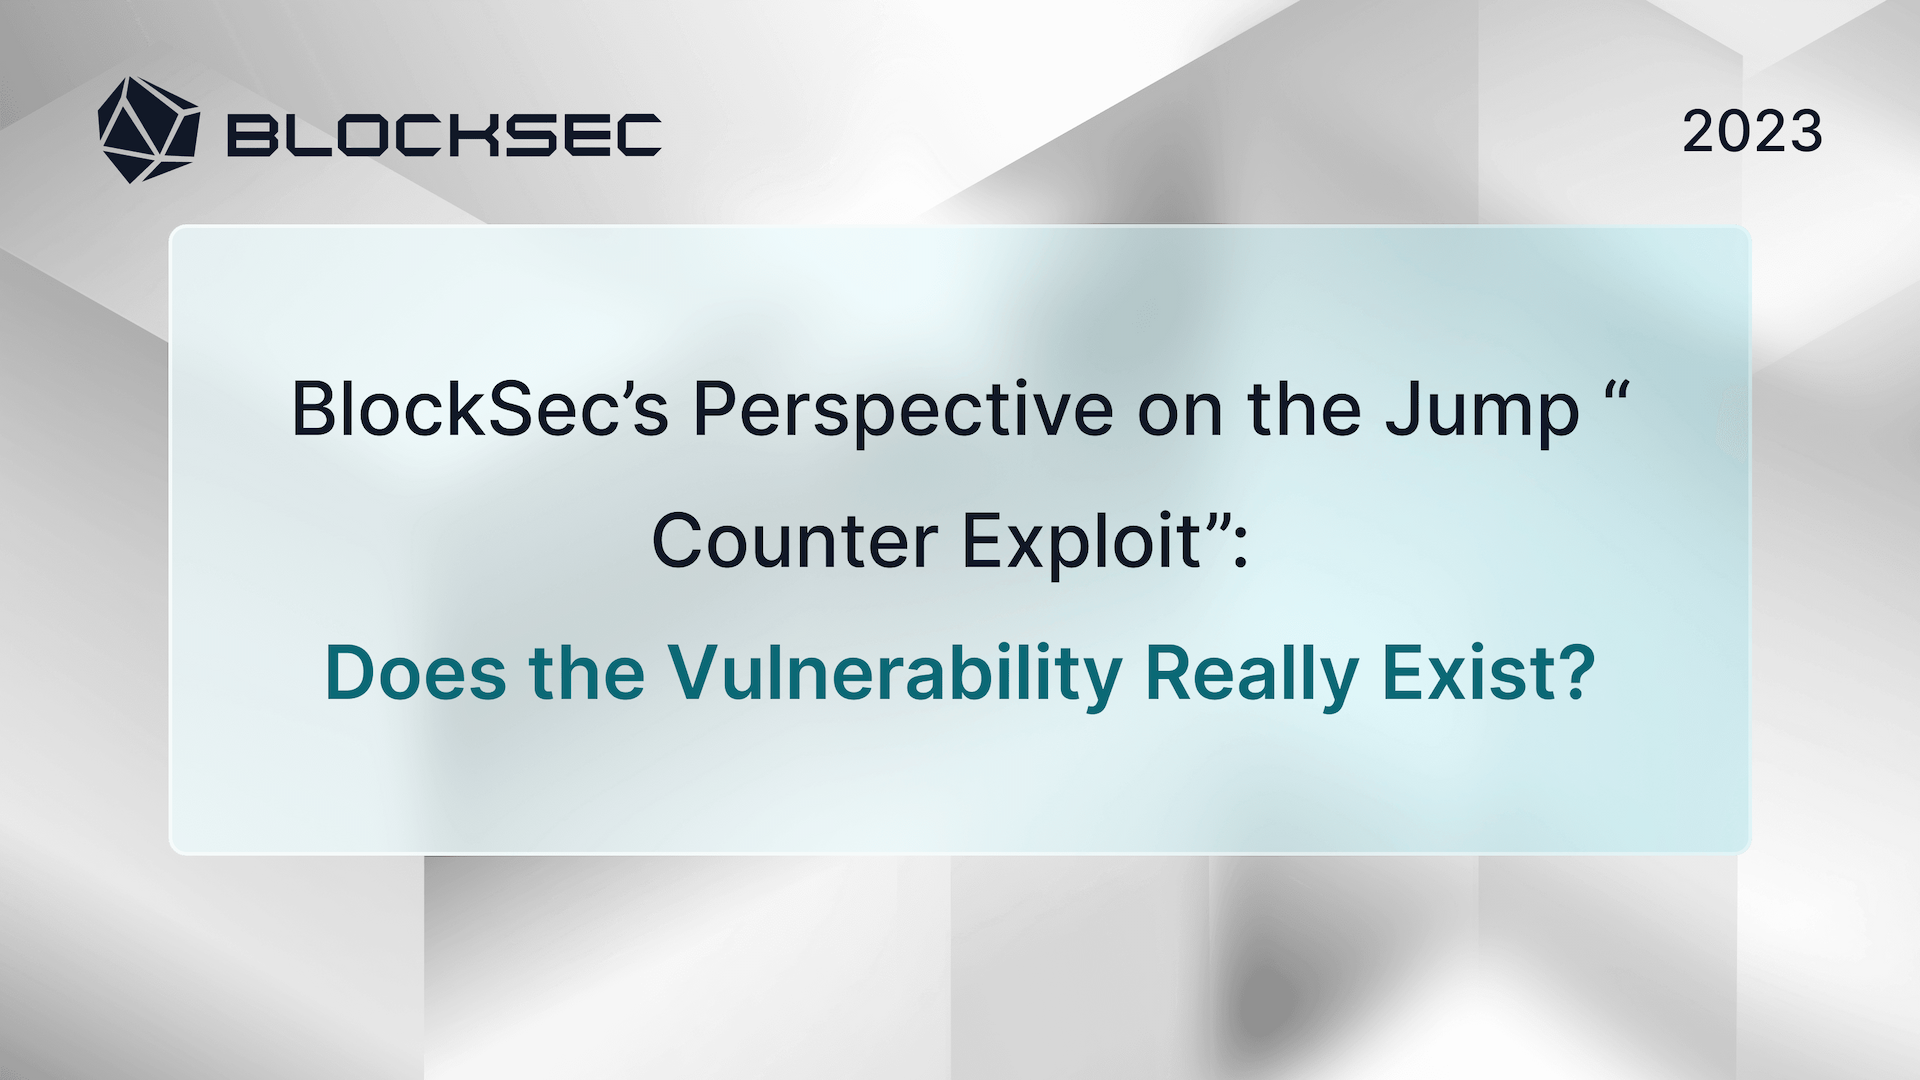 BlockSec’s Perspective on the Jump “Counter Exploit”: Does the Vulnerability Really Exist?